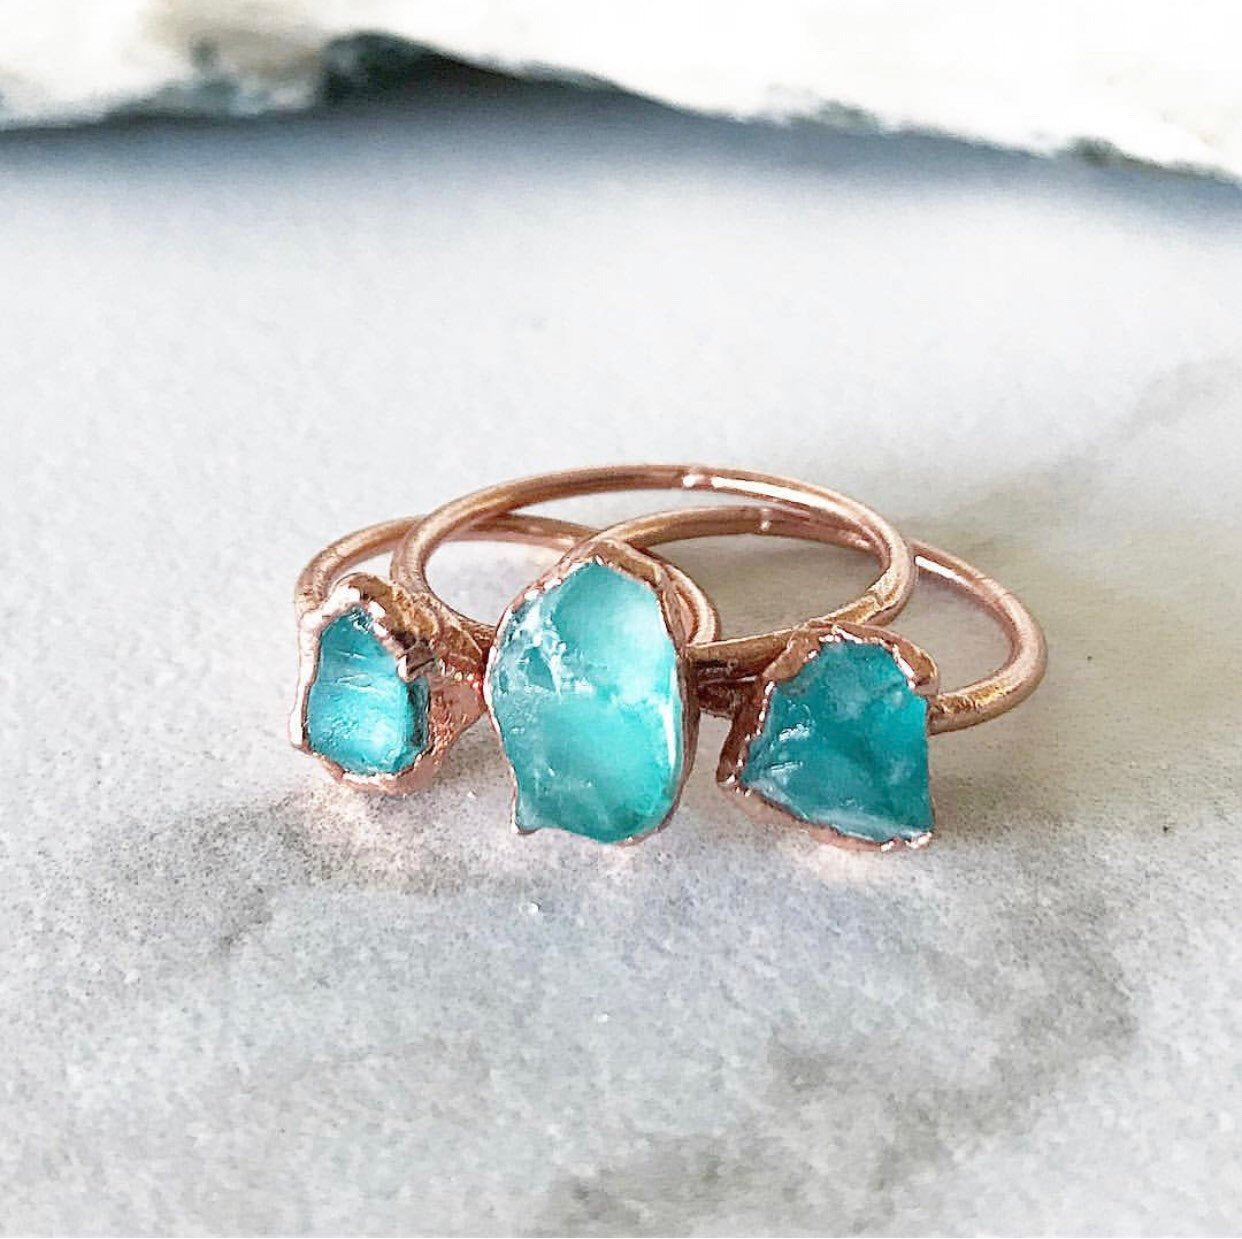 Blue Crystal Ring, Apatite Ring, Raw Blue Stone Ring, Copper Crystal Ring, Neon Apatite Ring, Raw Stone Jewelry, Blue Apatite Ring